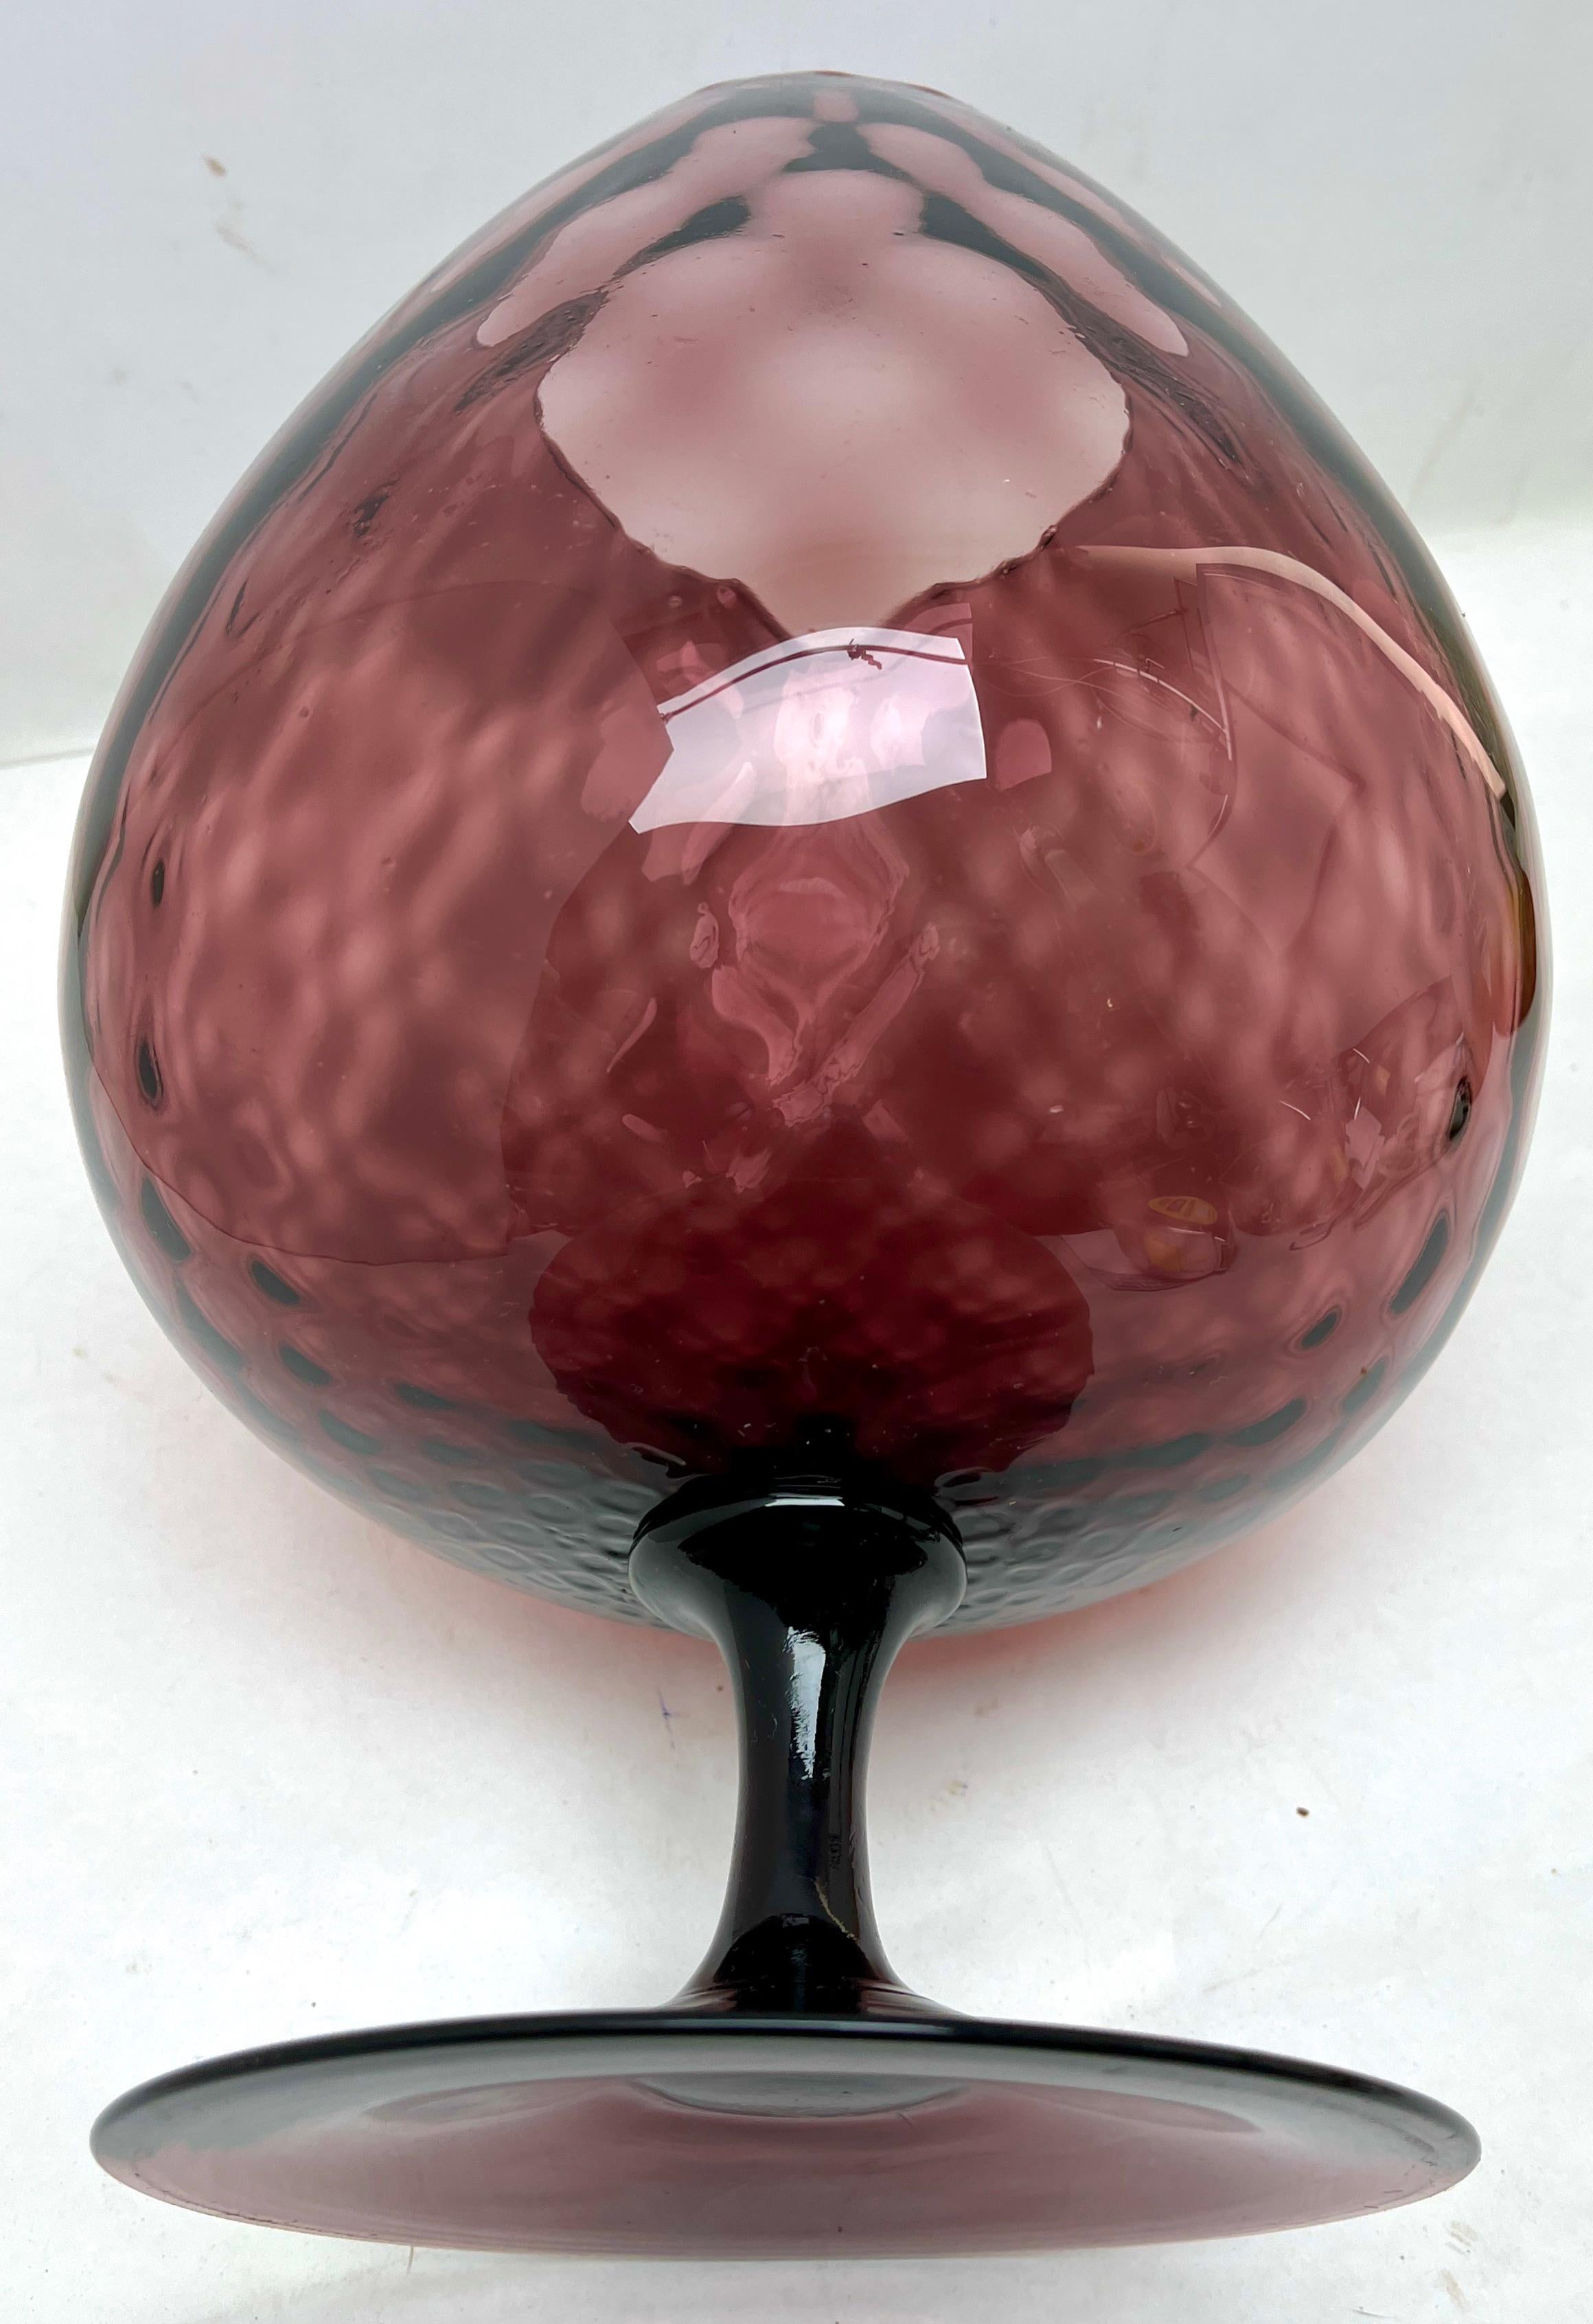 Vintage Red Opalescent Italian Opaline Vase on Foot from Florence, 1960s For Sale 1